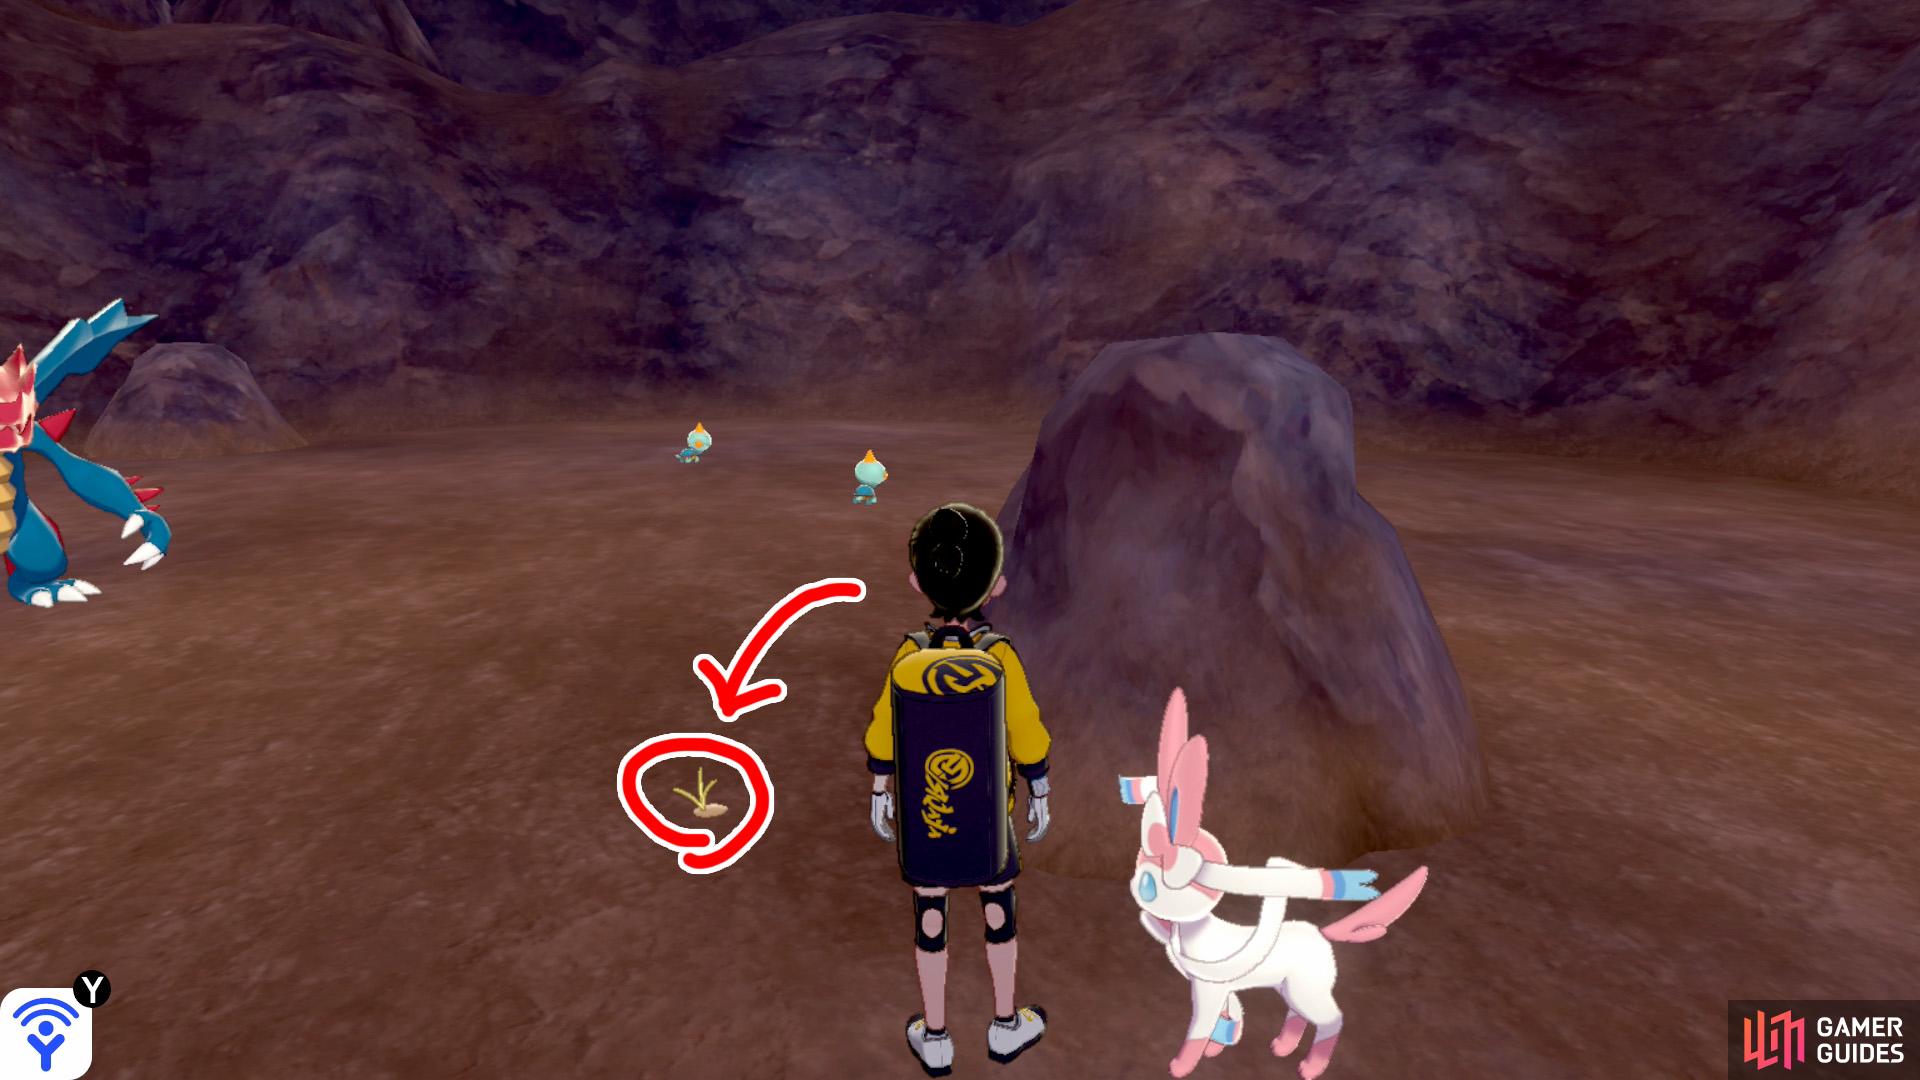 2/7: From Diglett 1, go down the slope along the left side. You'll reach an area with wild Pokémon. Check behind the rock on the left.